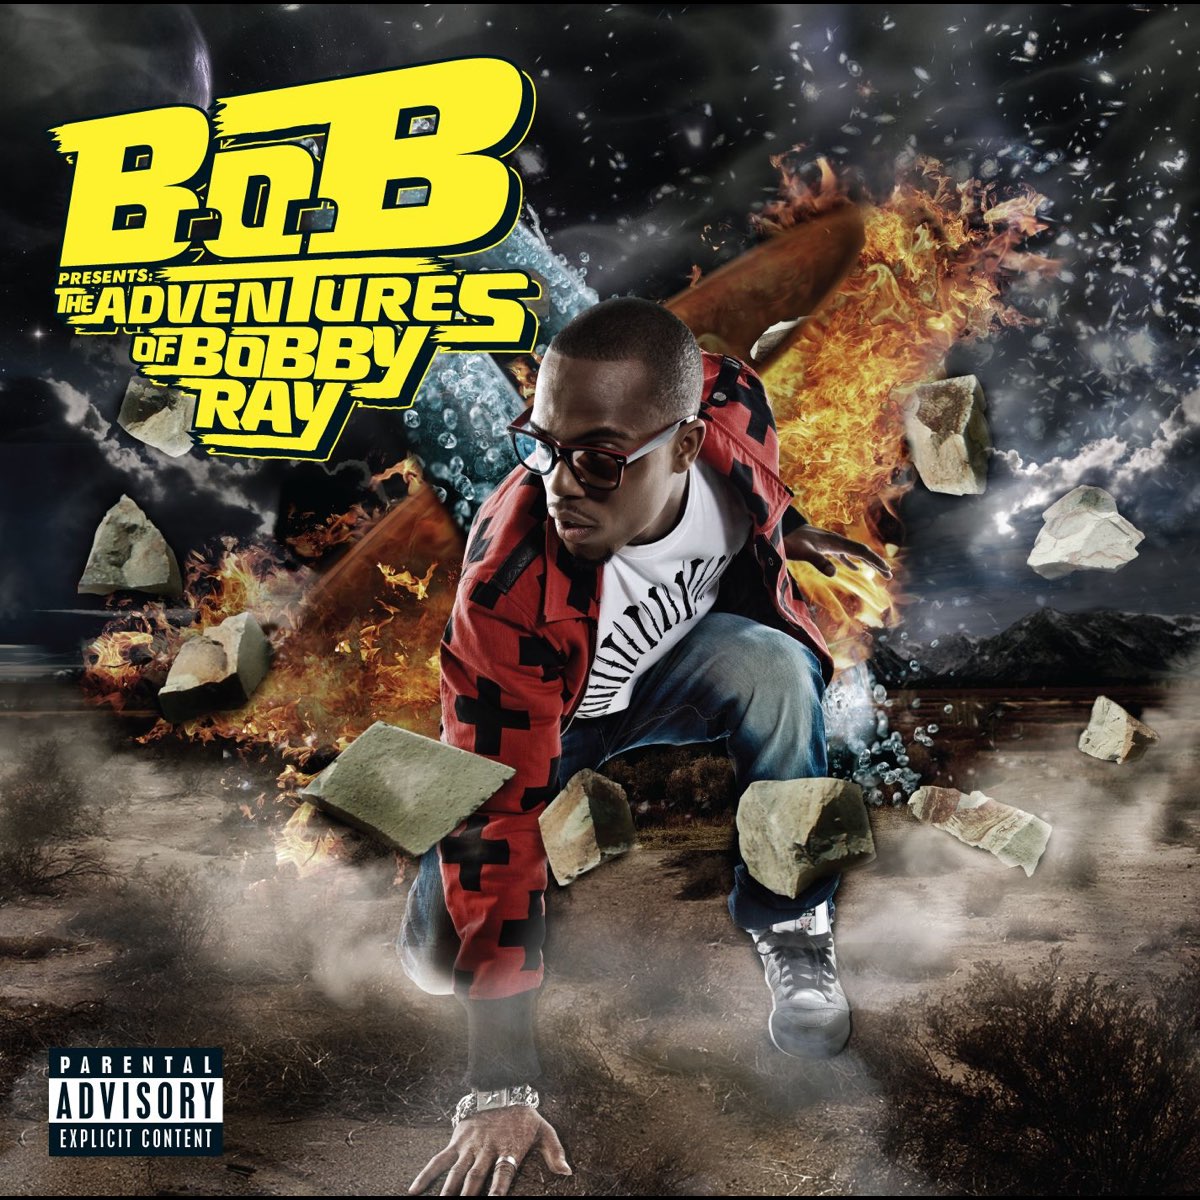 ‎B.o.B Presents The Adventures of Bobby Ray (Deluxe) by B.o.B on Apple